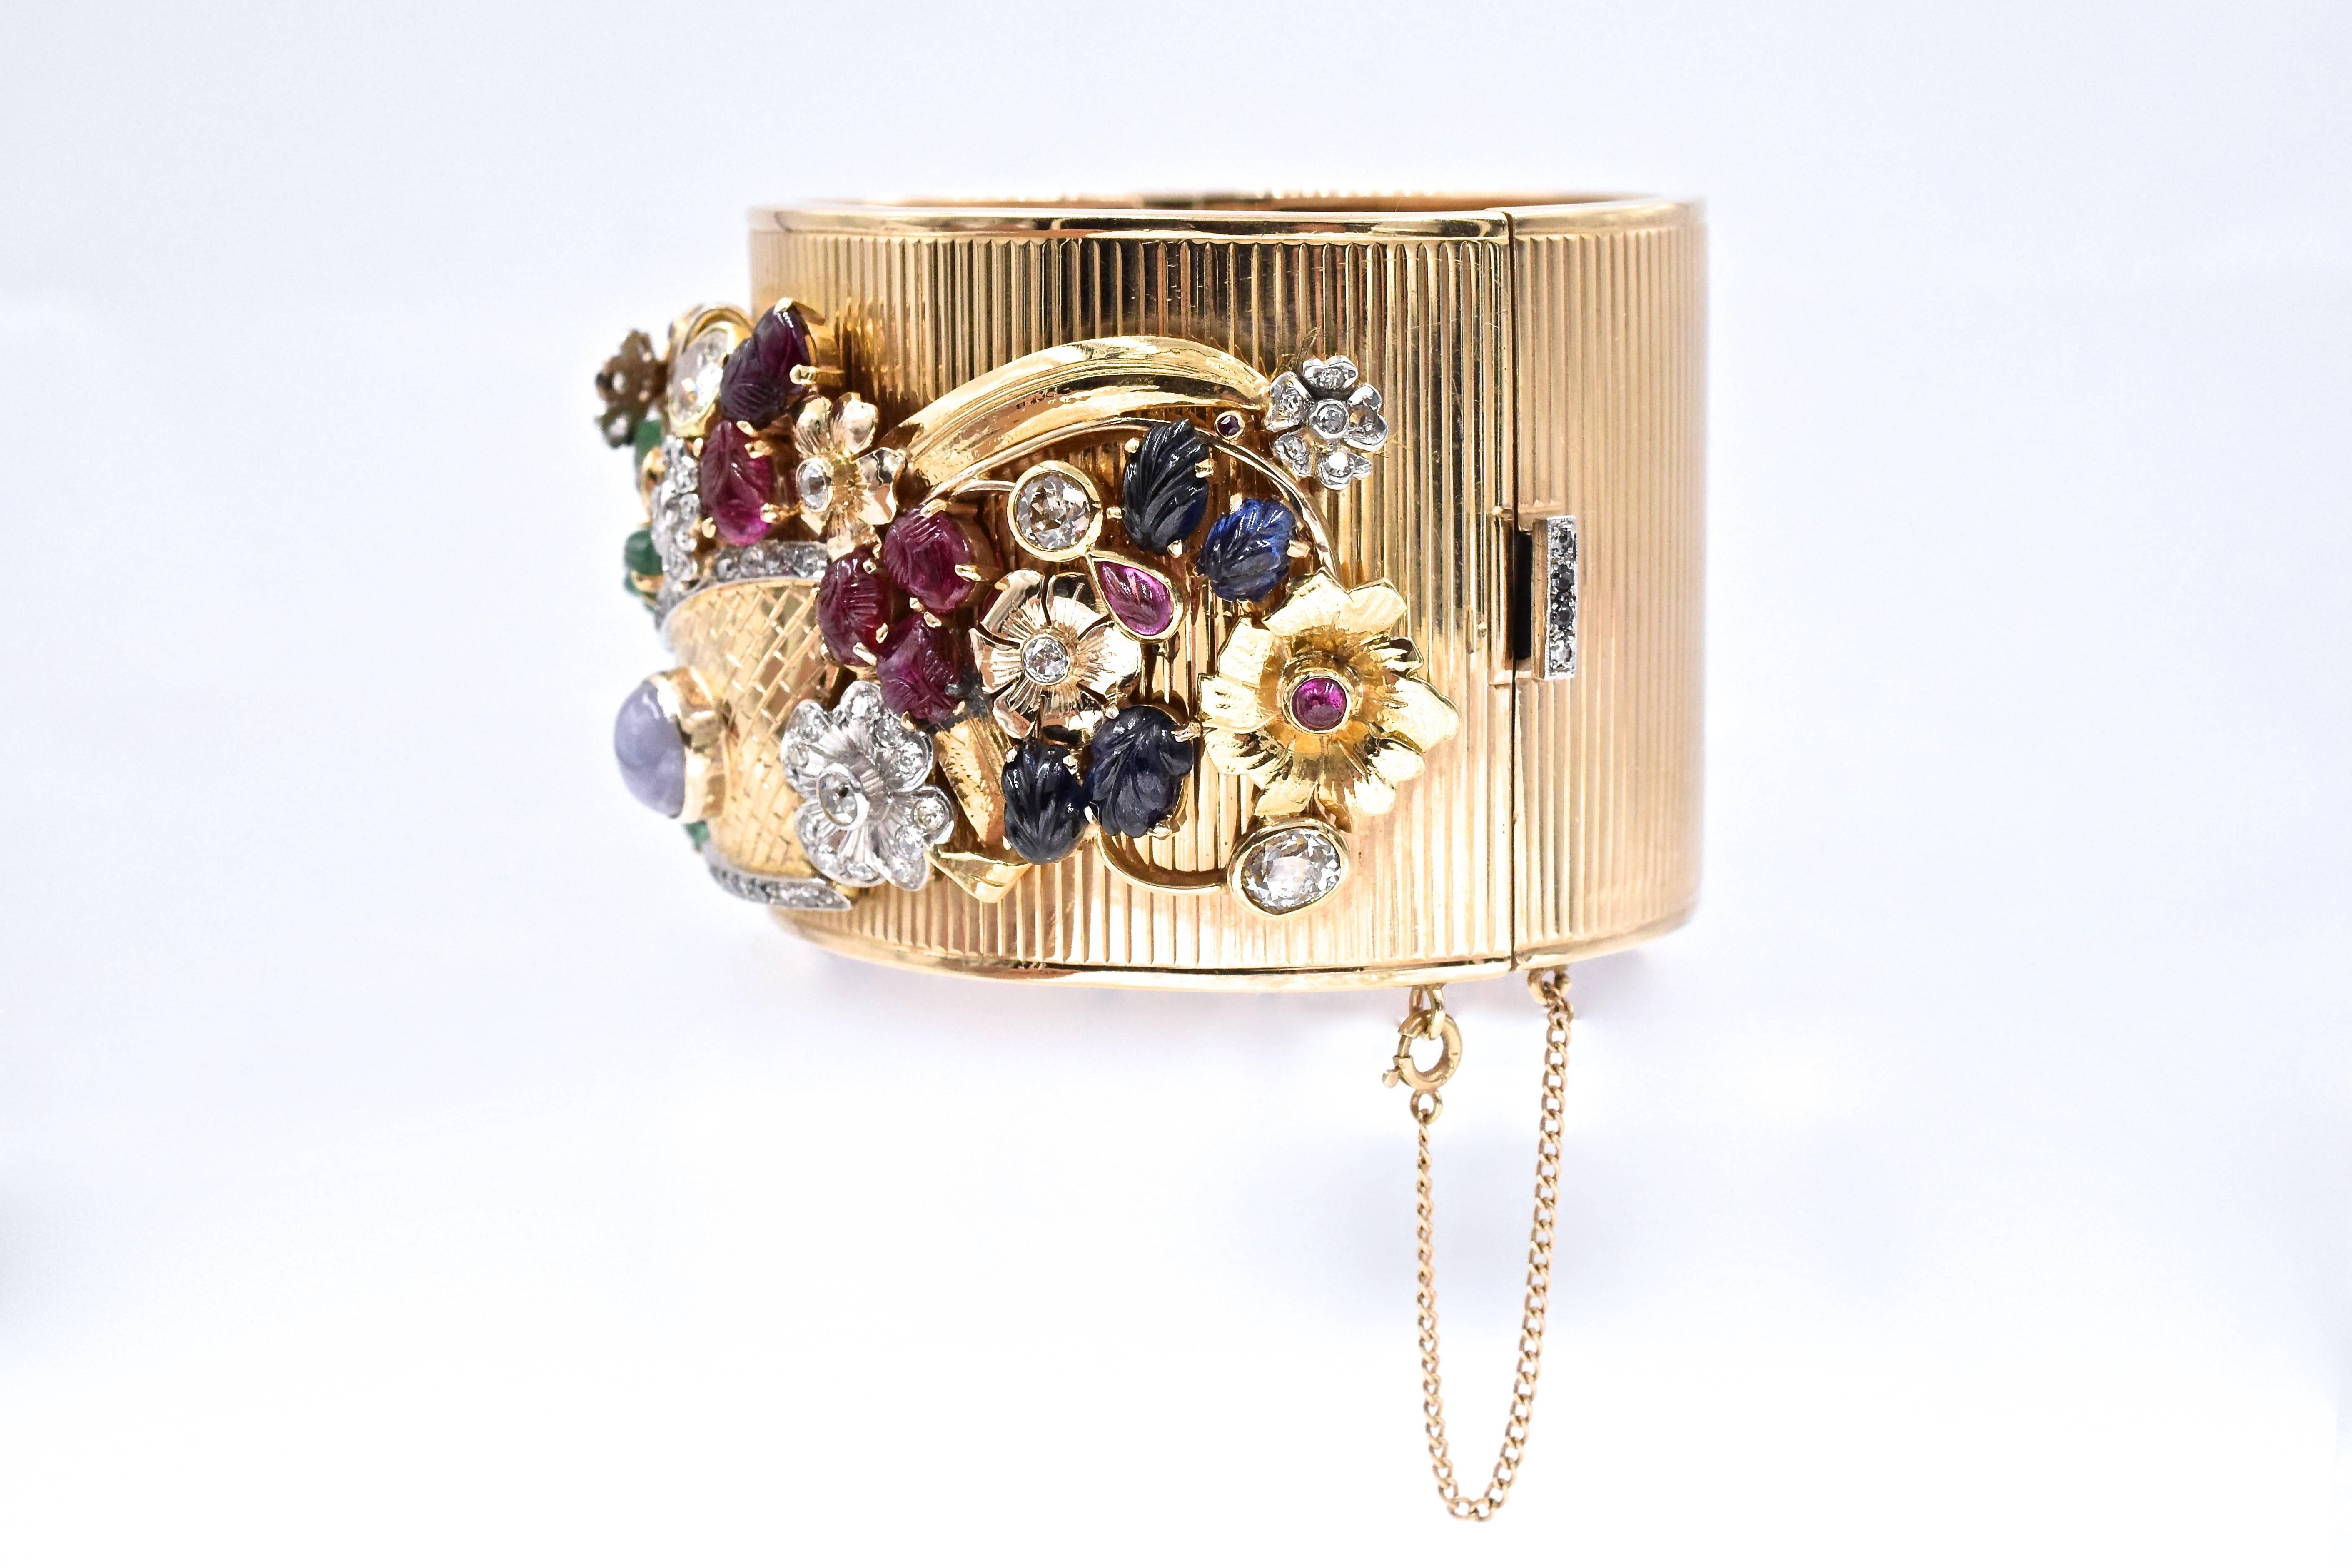 Retro! circa 1940's  rose gold fluted design bangle with diamonds, sapphires, rubies and emeralds flower basket motif overlay. with internal circumference of approx. 6.5 inches. 
Measurements: 
Width: 40mm
Wrist size: 6 inches